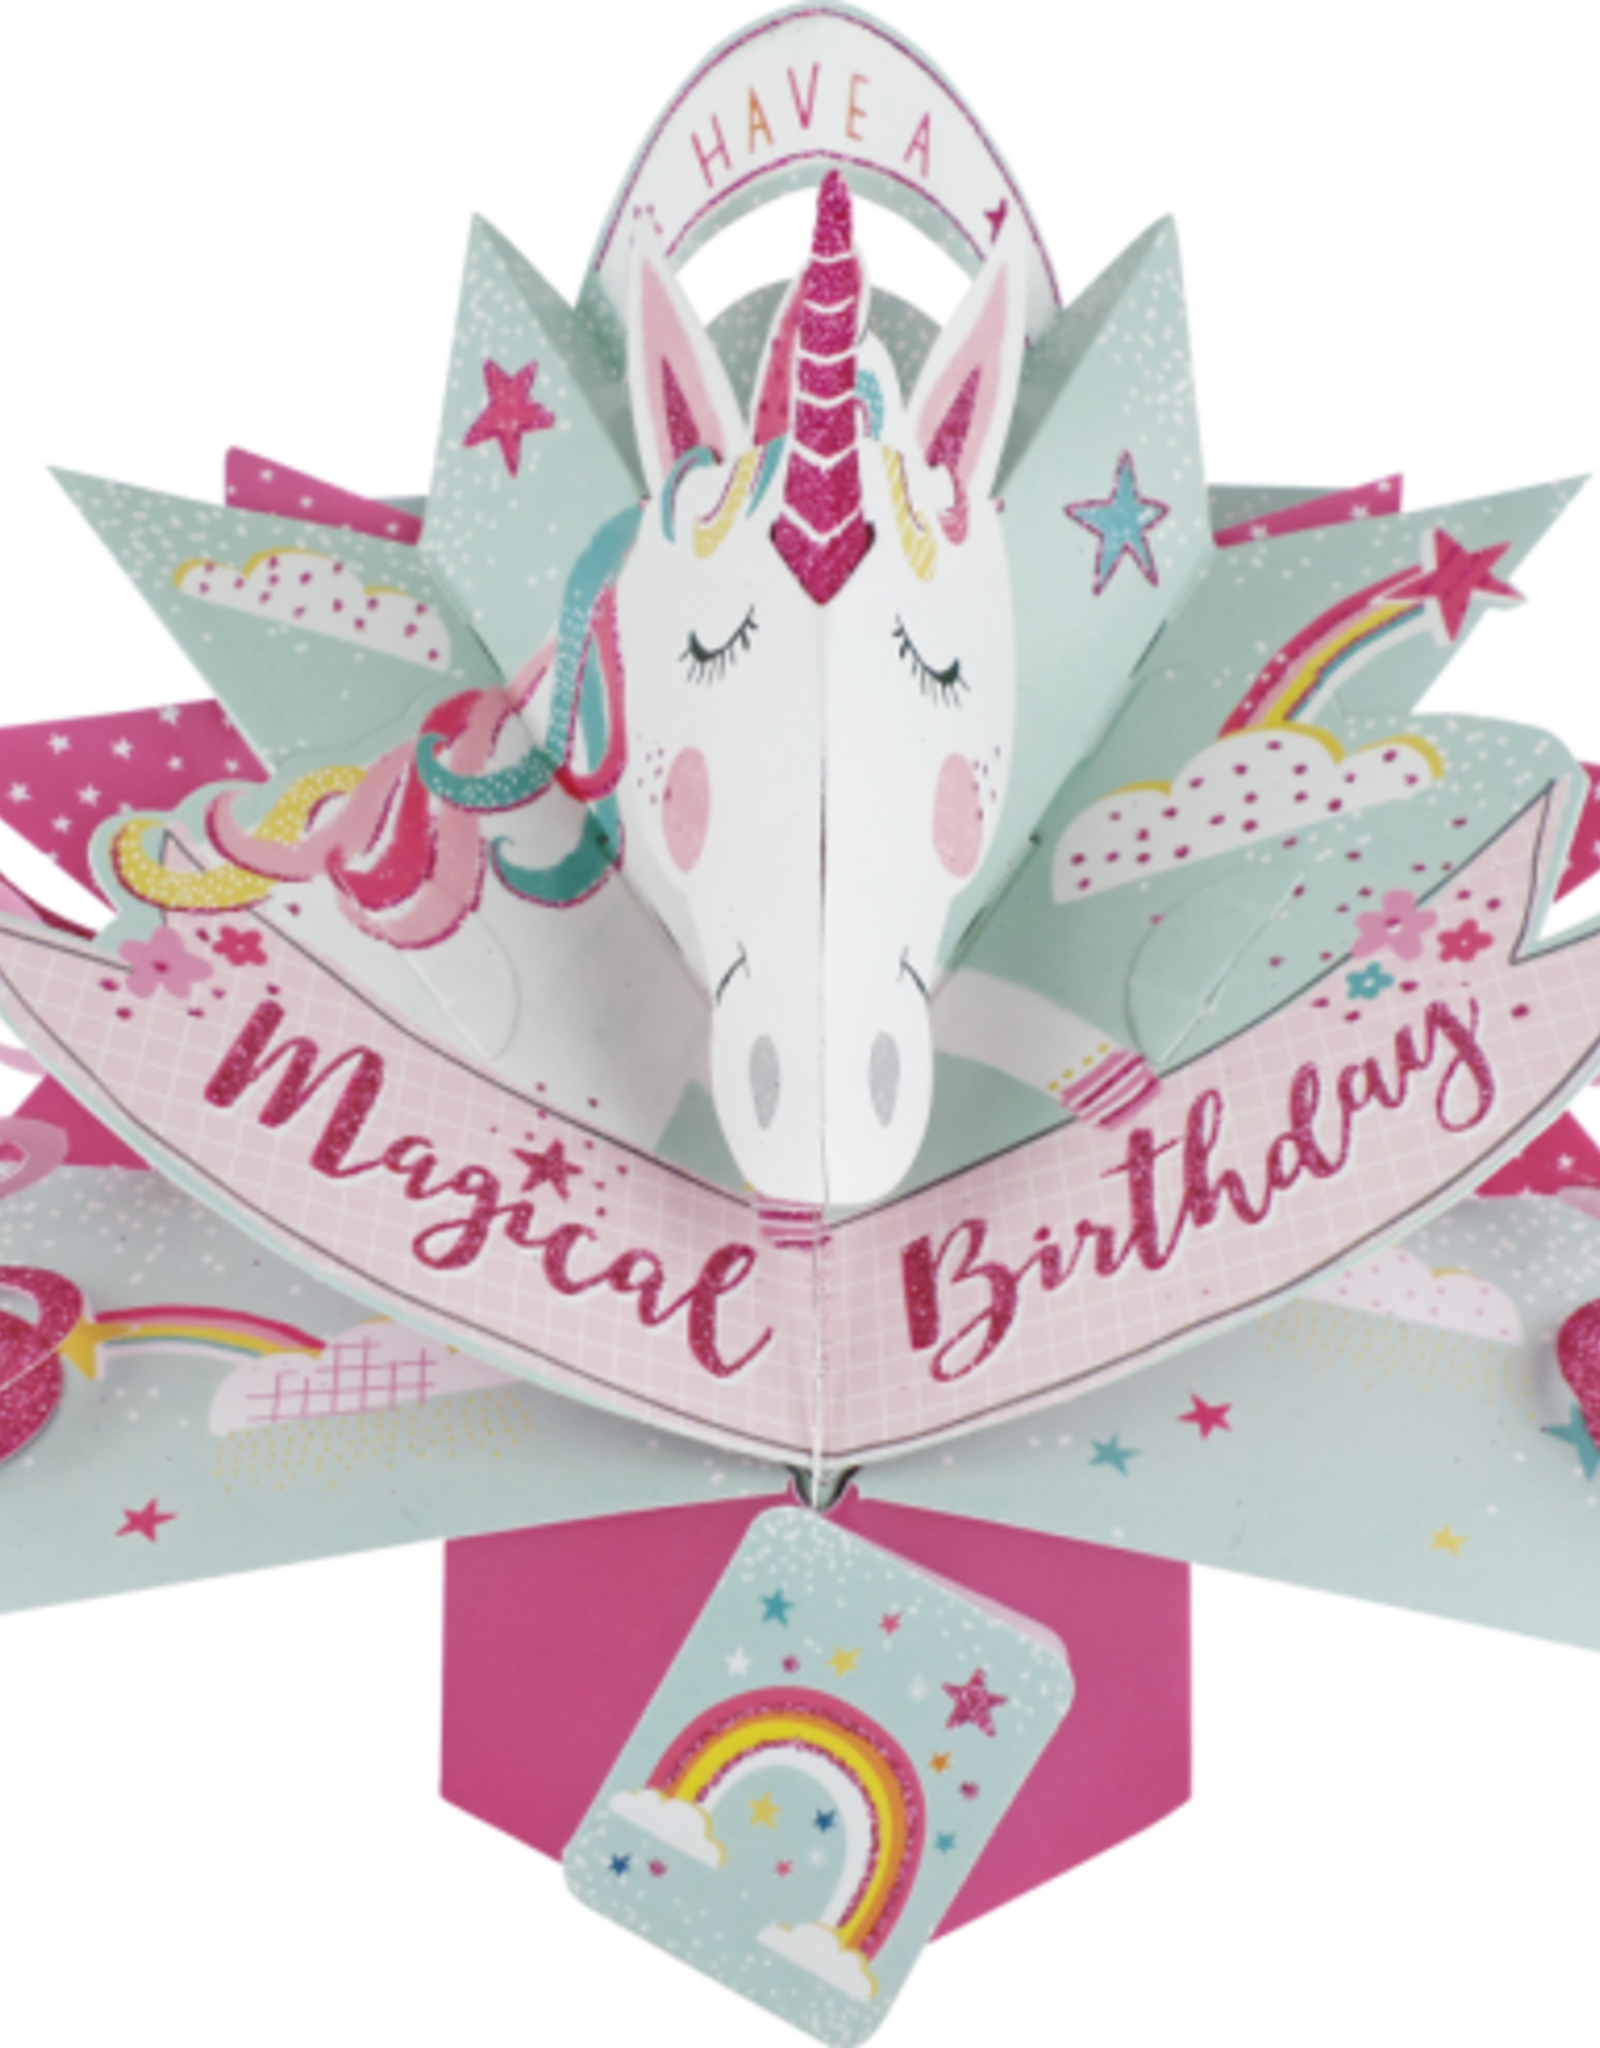 Incognito POP UP - HAVE A MAGICAL BIRTHDAY - UNICORN (8.5" X 10") POP UP